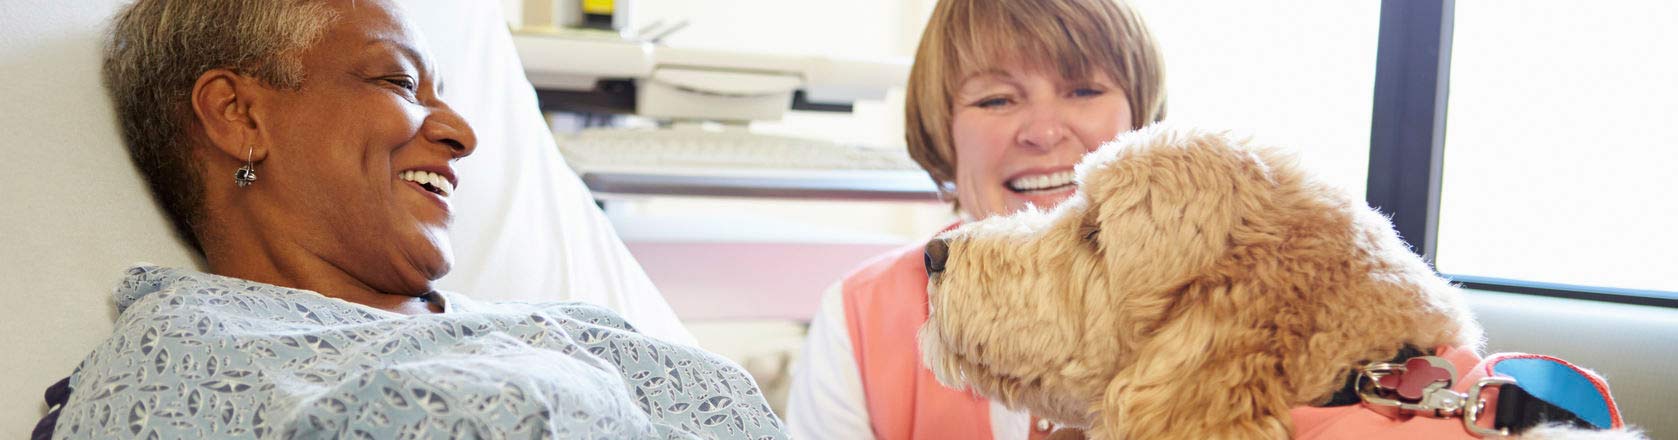 service therapy dogs that help manage pain visits woman in hospital